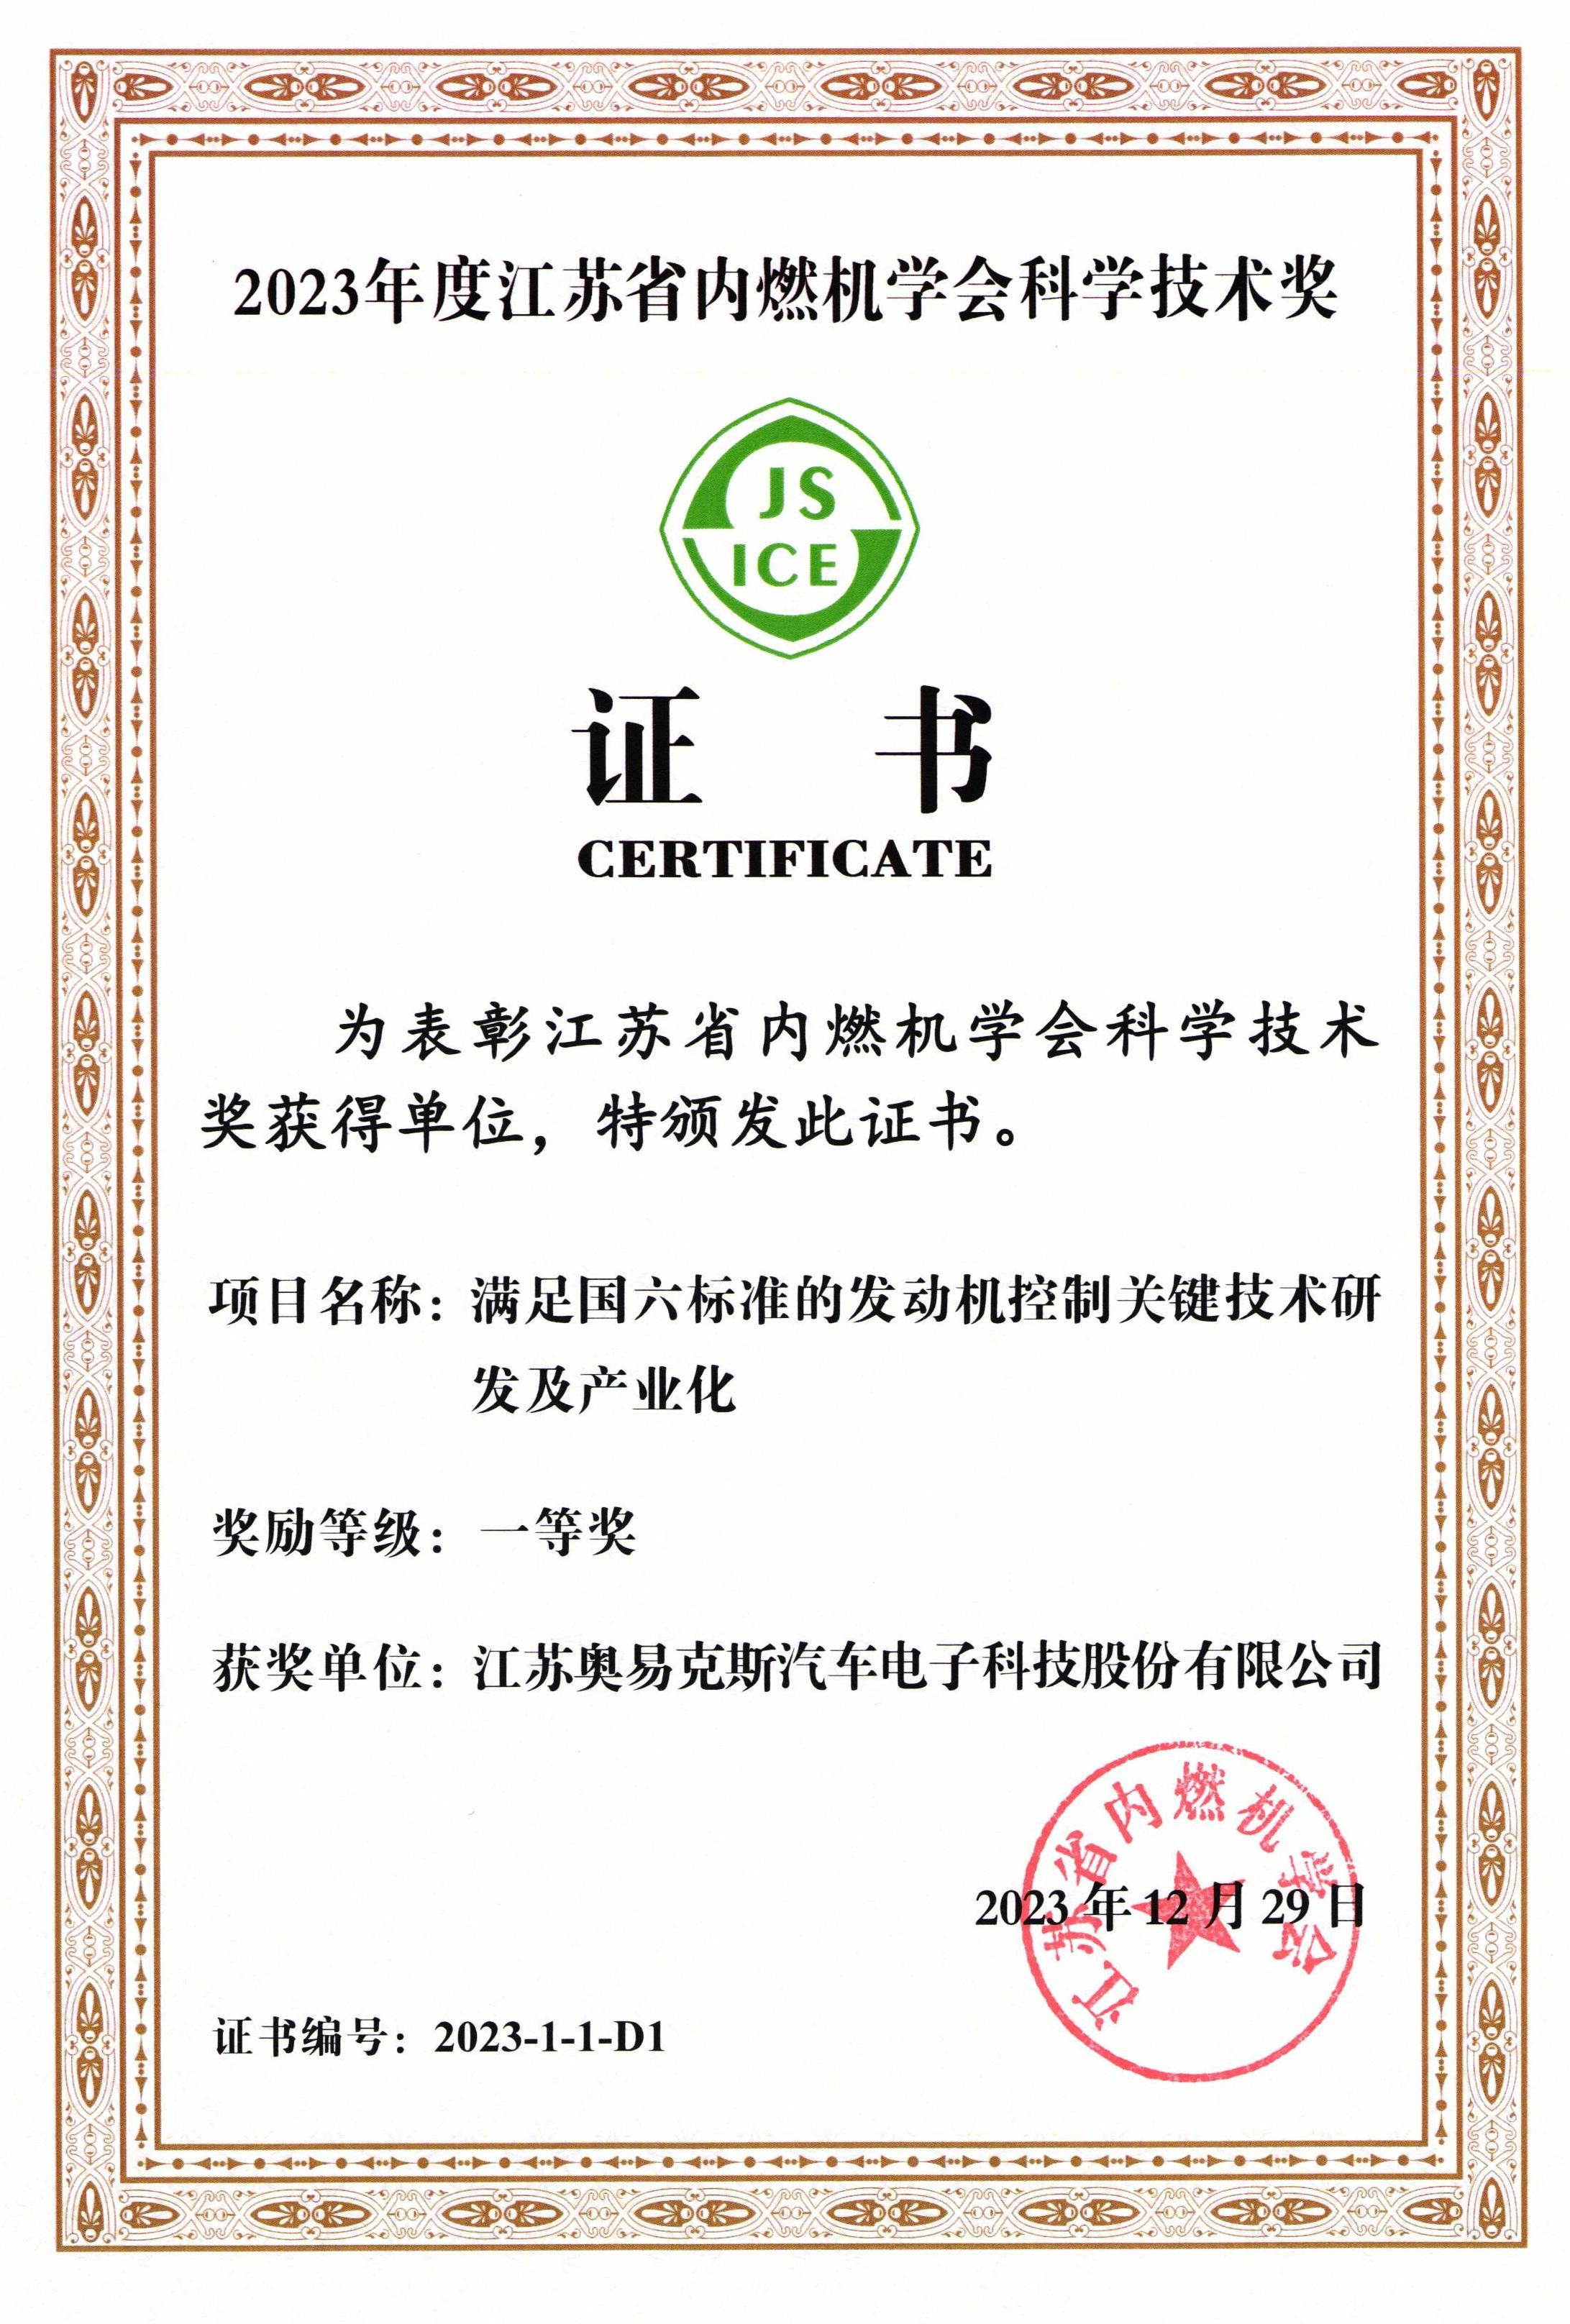 First Prize of Science and Technology Award of Jiangsu Socieety Internal Combustion Engines in 2023